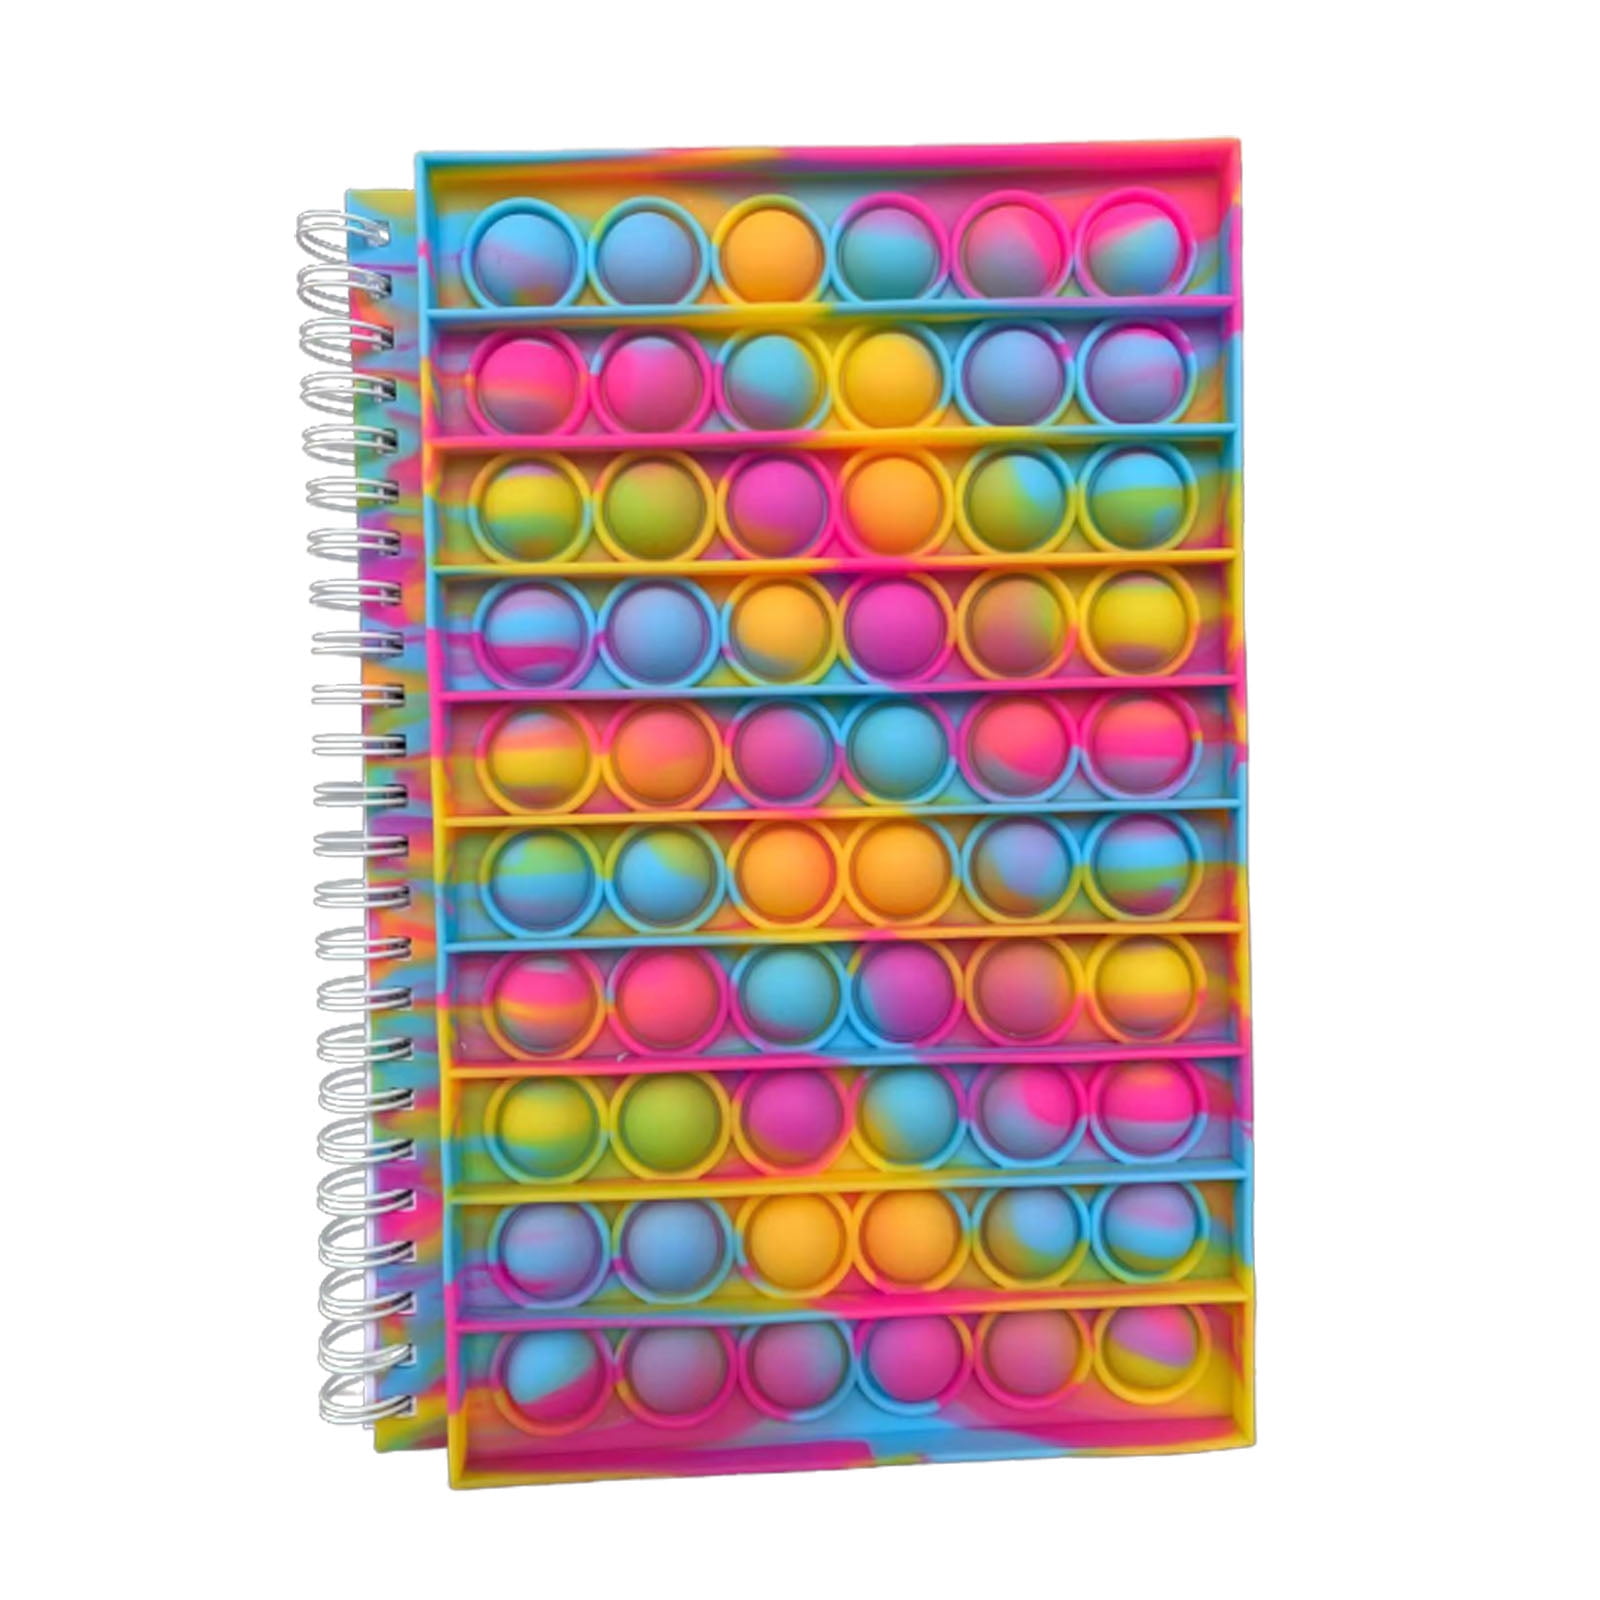 7iper Pop Notebook, Push bubble Spiral Notebooks Fidget Toys, Cute  Composition Notebooks, College Ruled Notebooks, Protable for School Office  Gifts